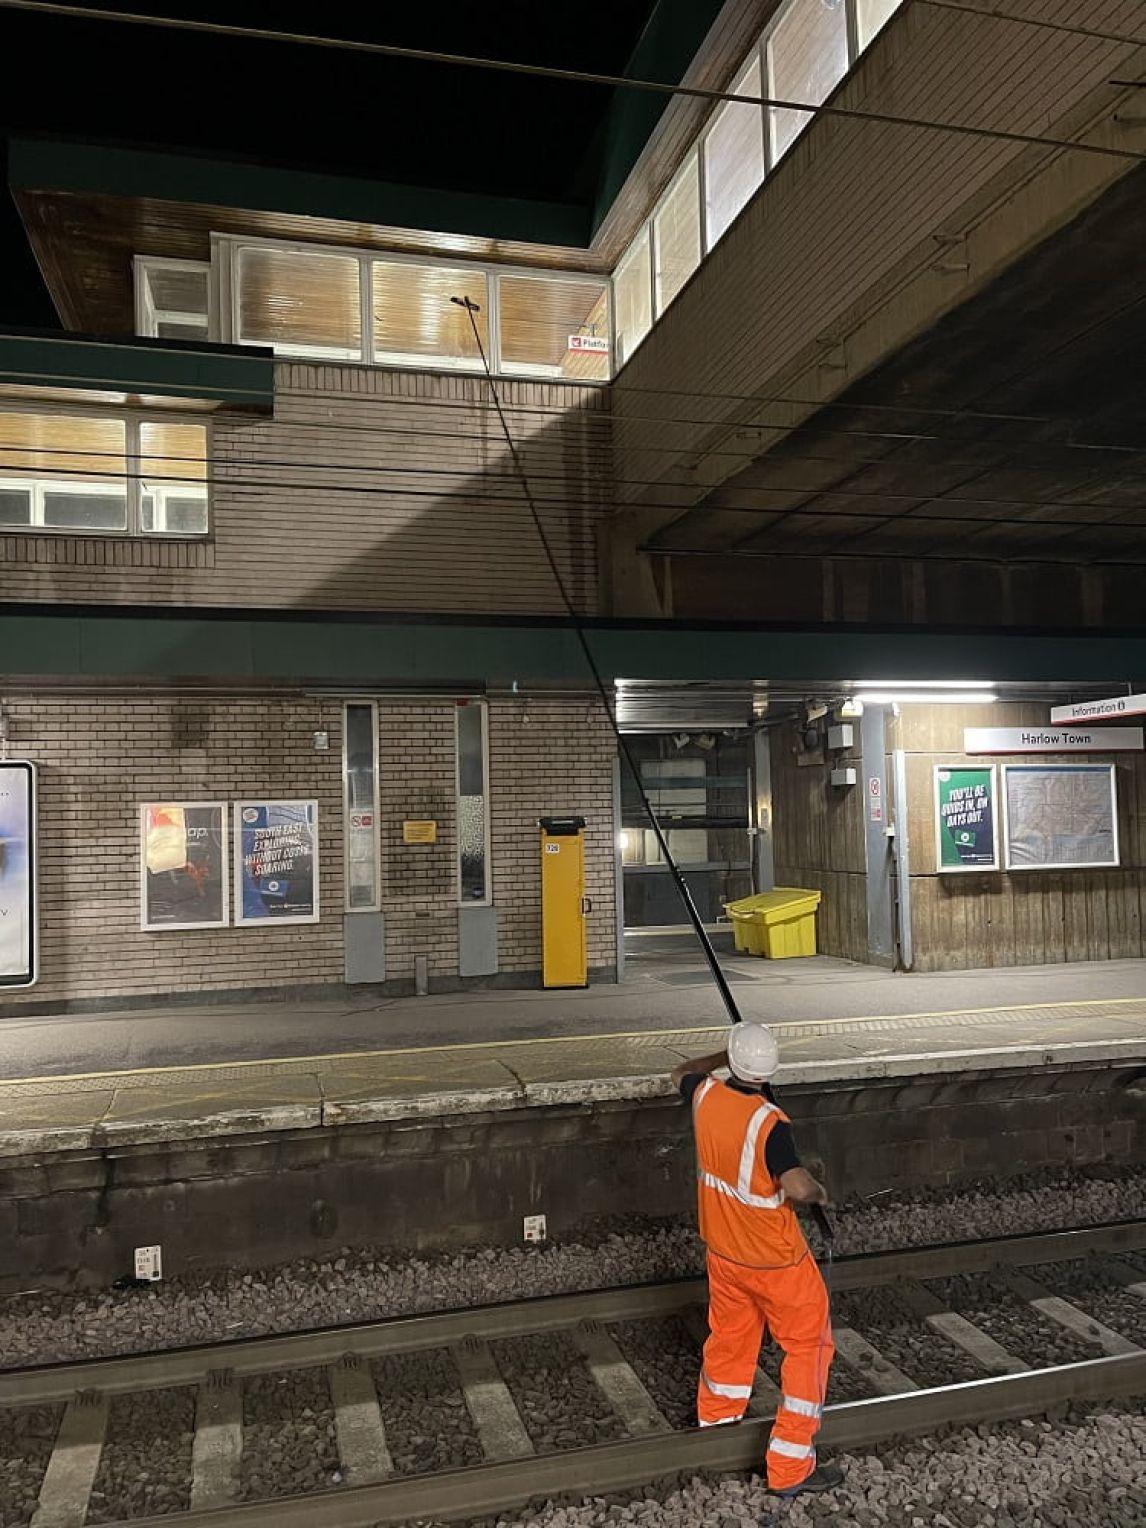 Cleaning service taking place at stations 